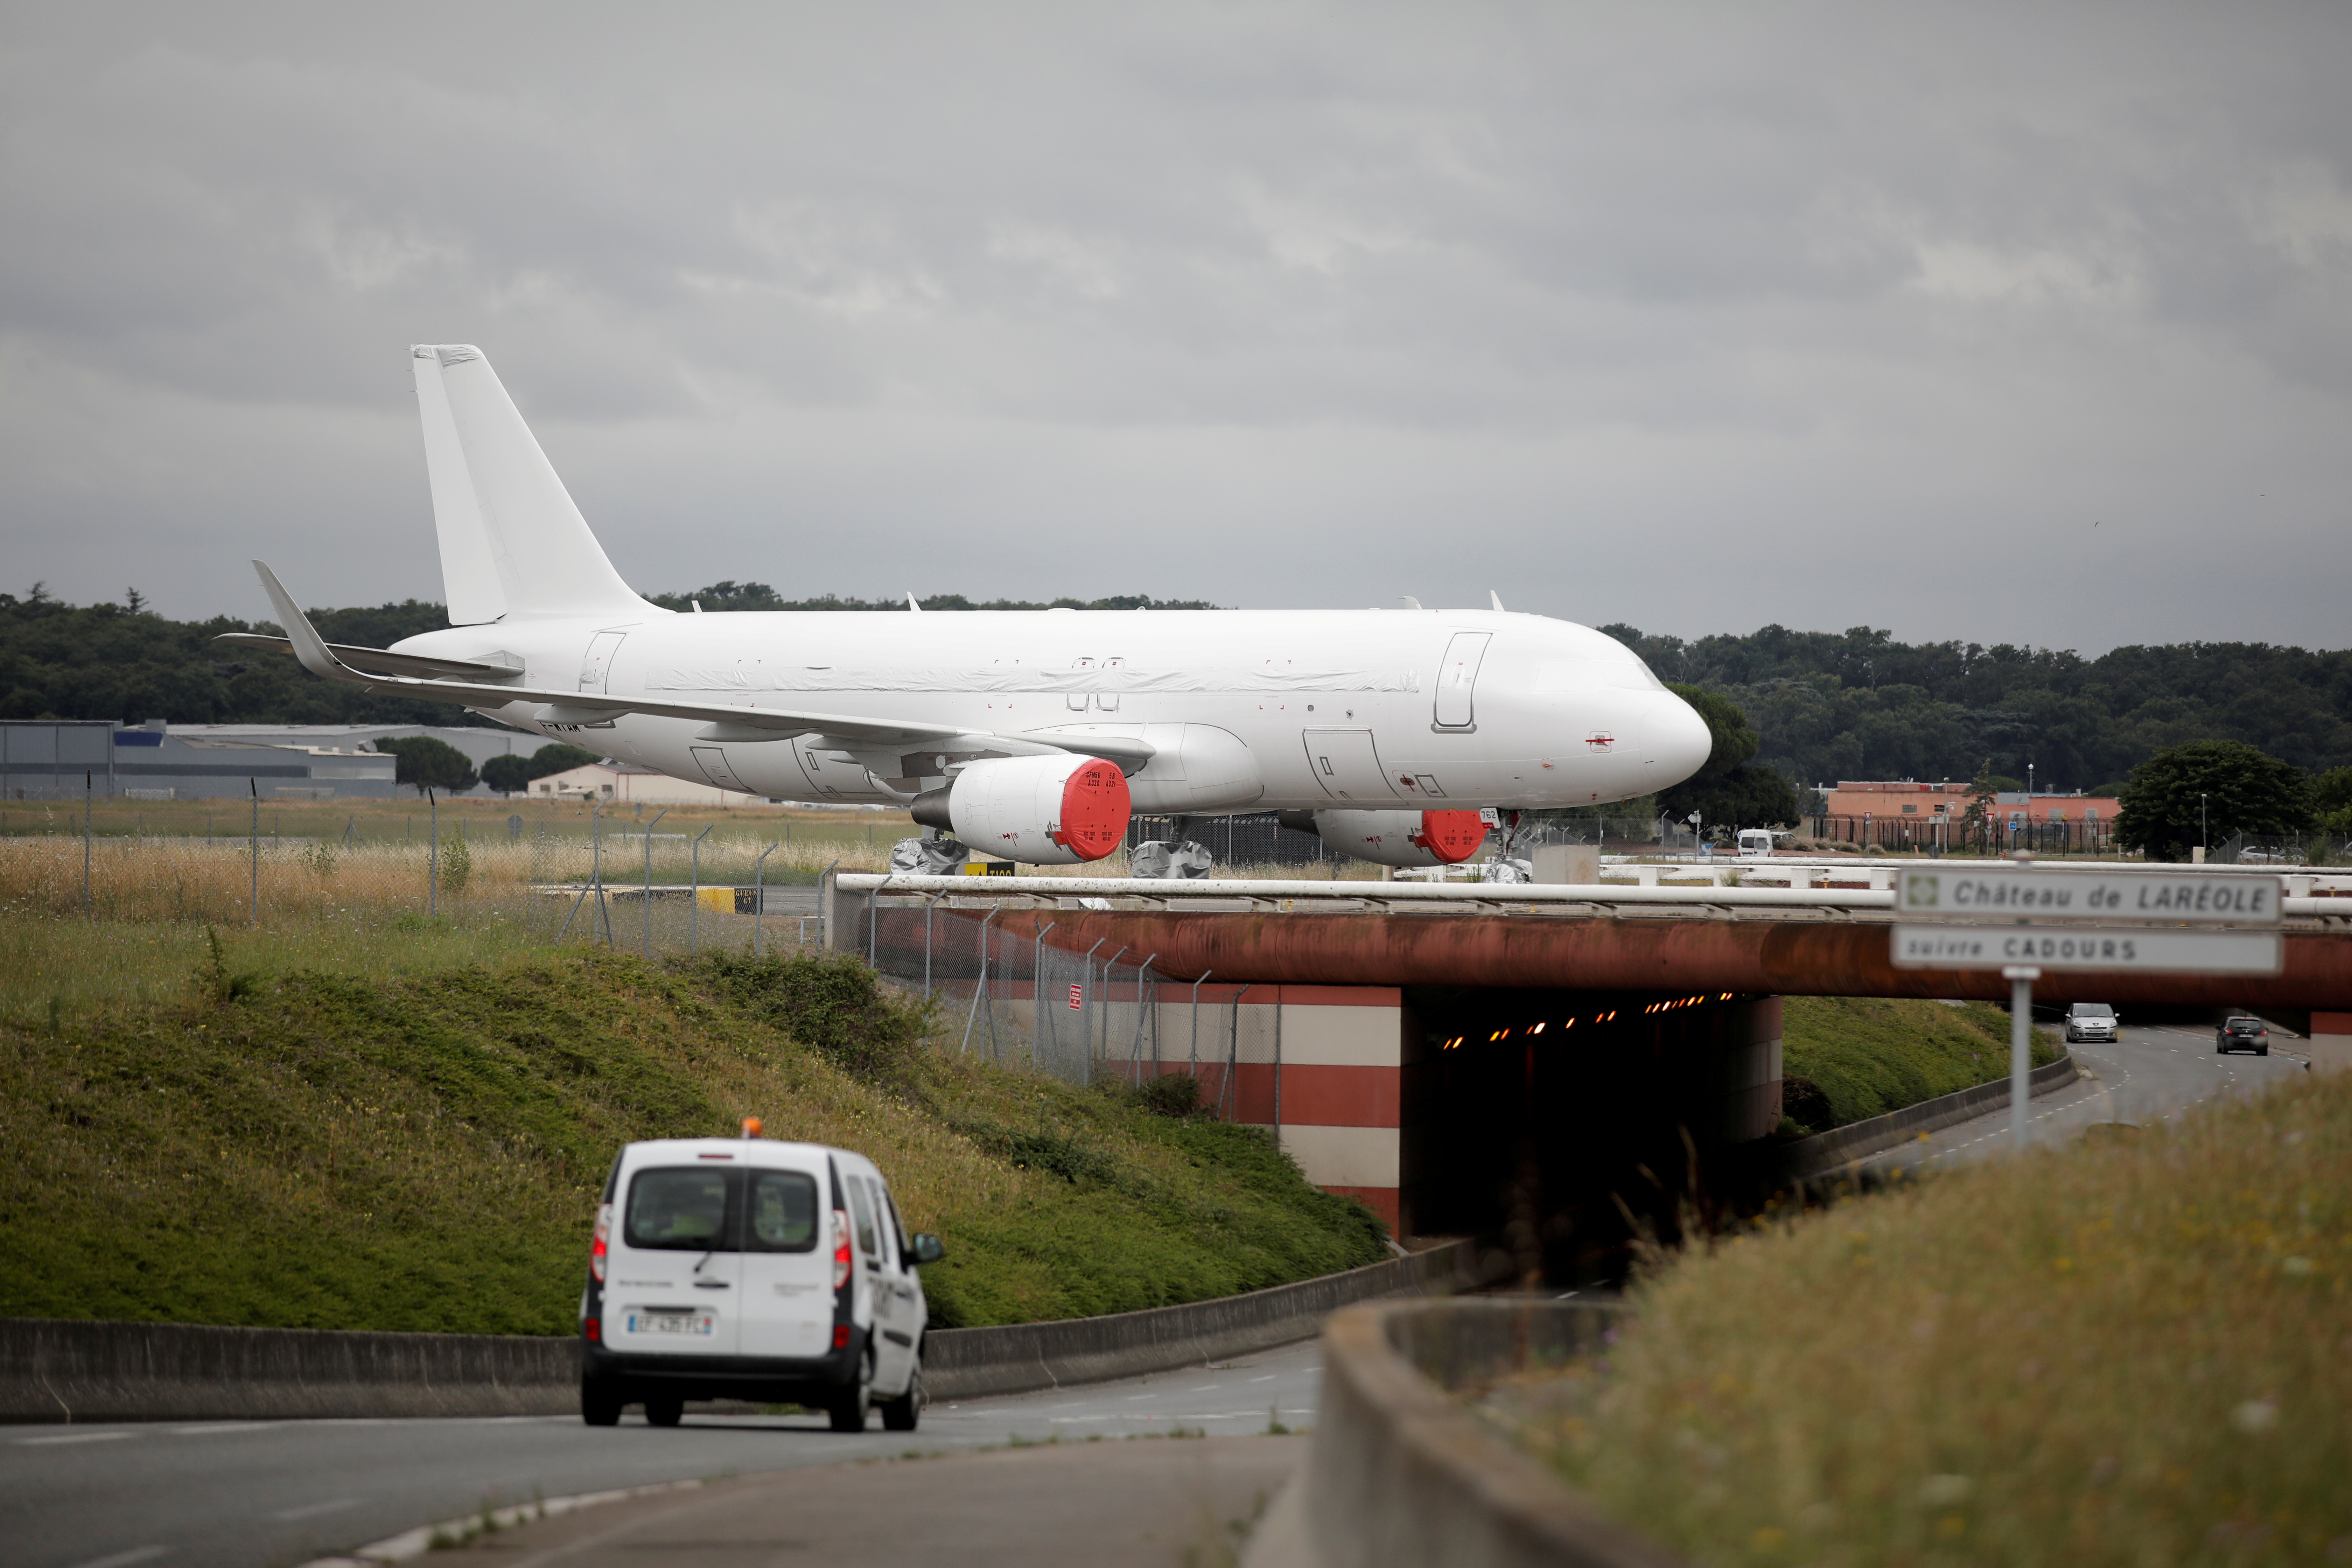 An unmarked A320-214SL Airbus plane is seen on the tarmac at the Airbus factory in Blagnac